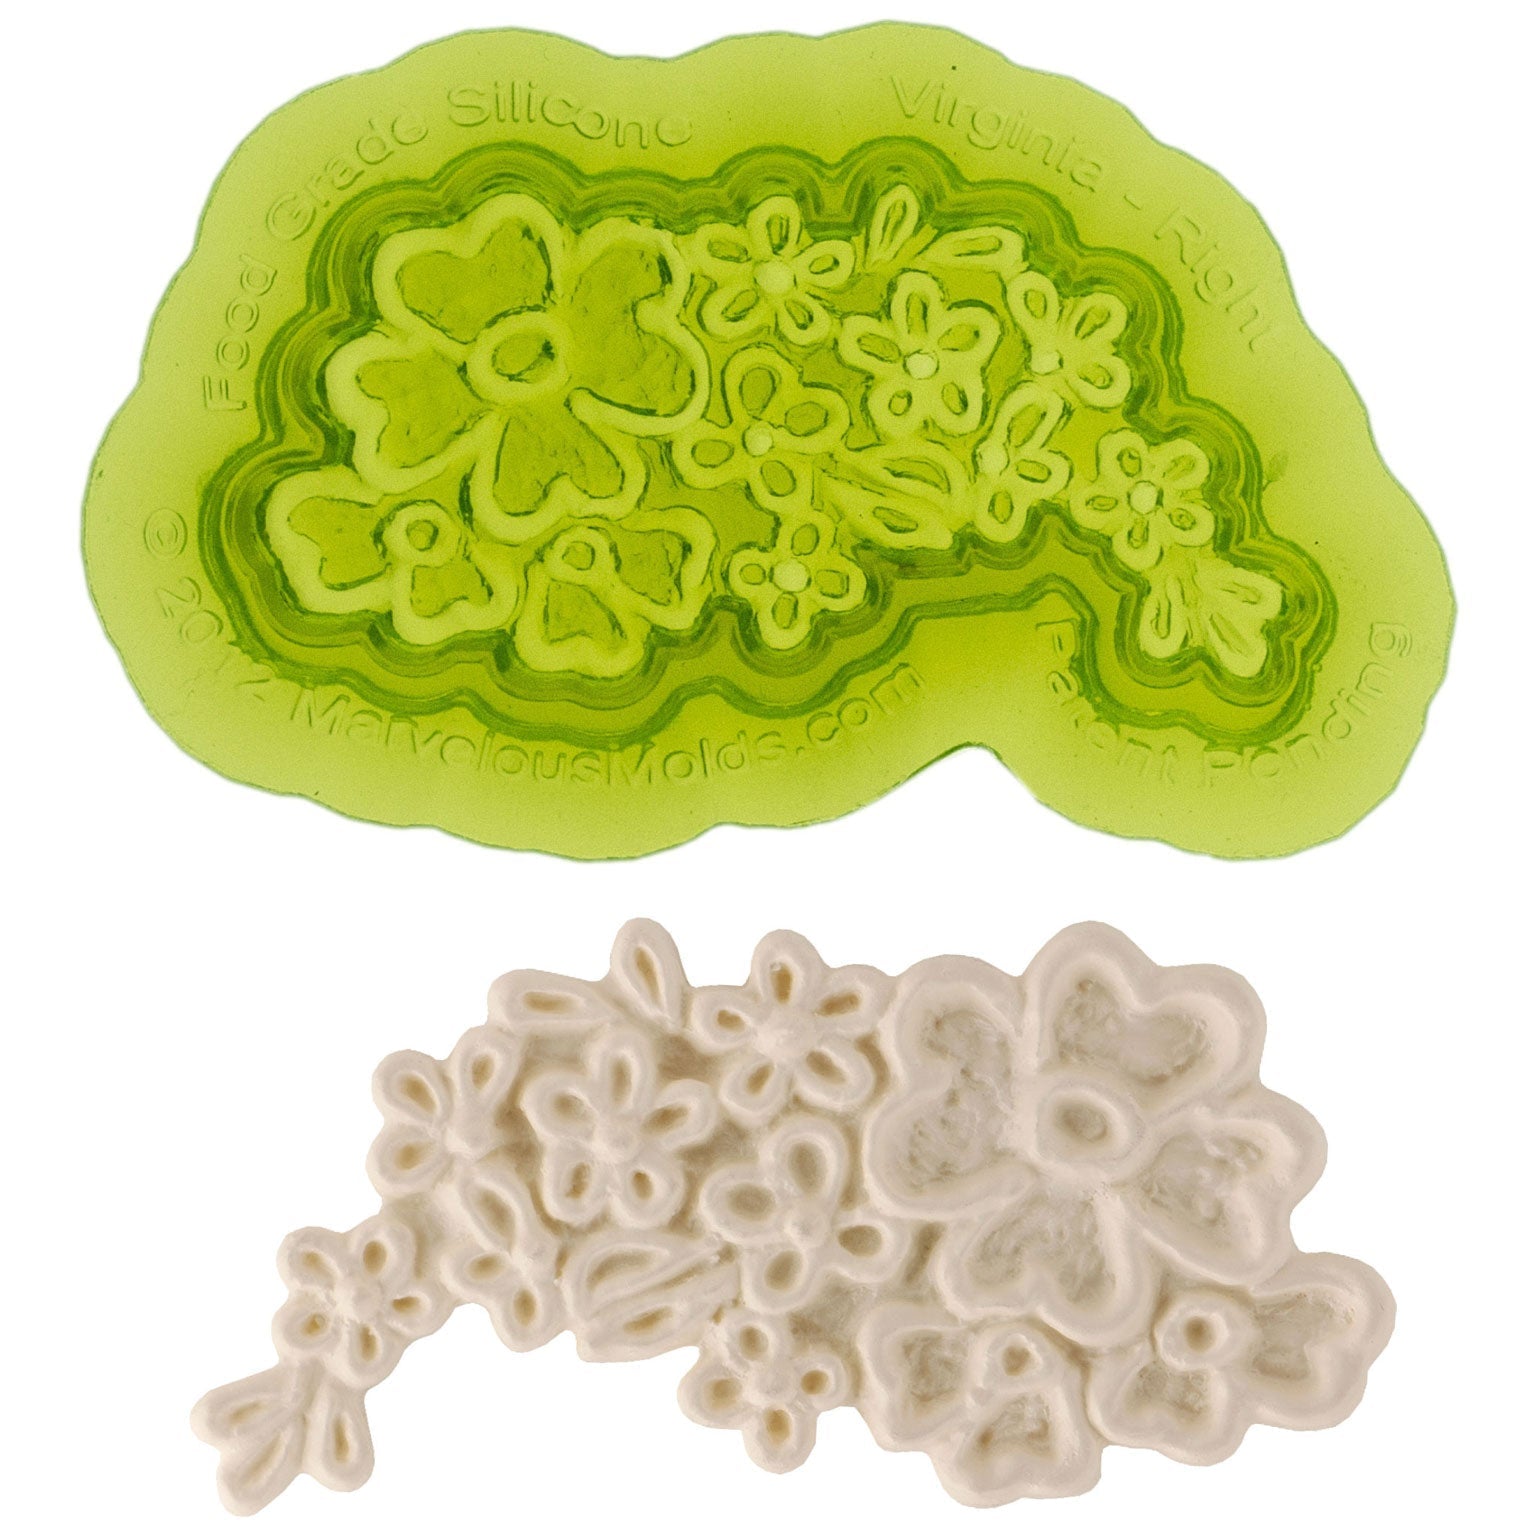 Silicone Baking Molds for sale in Wallace Landing, Louisiana